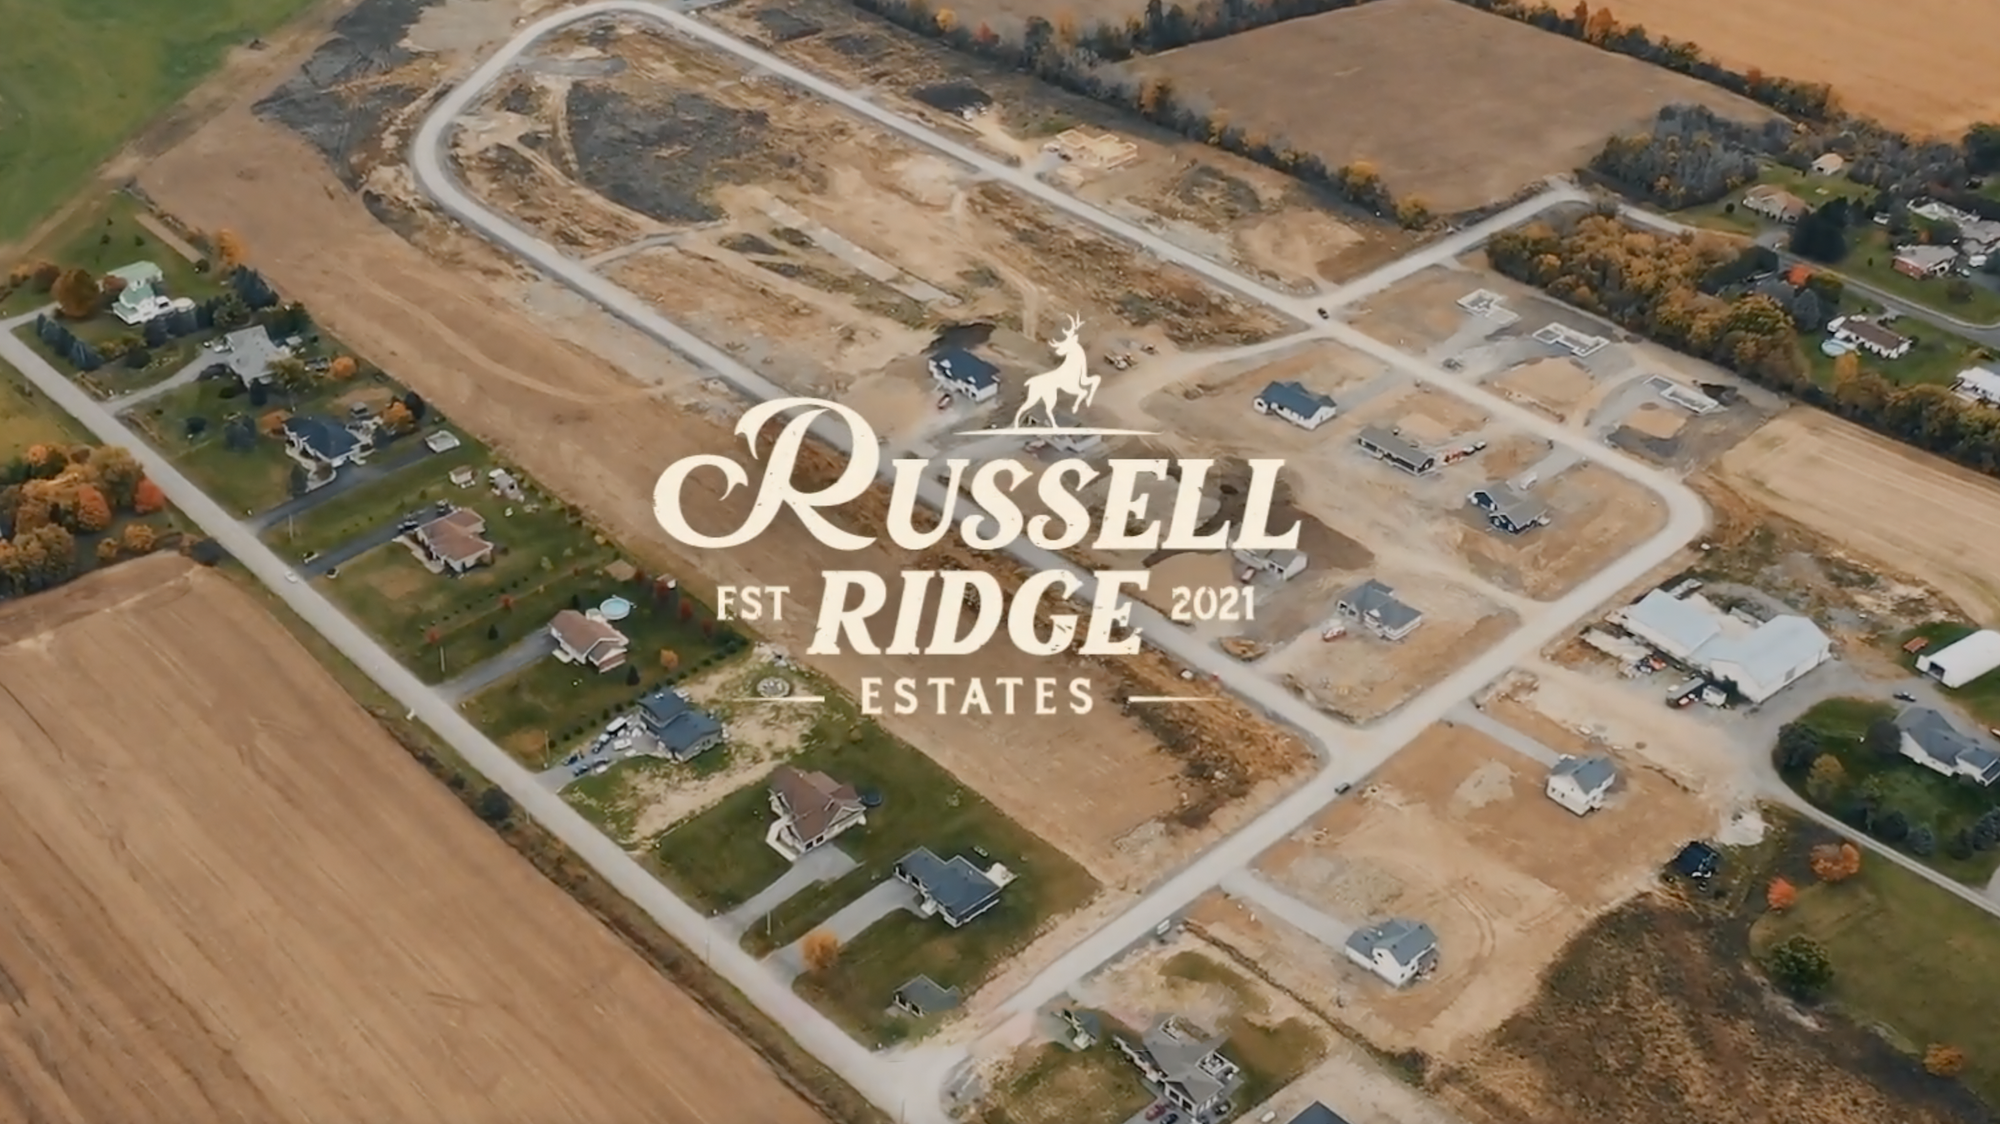 Learn about Russell Ridge Estates